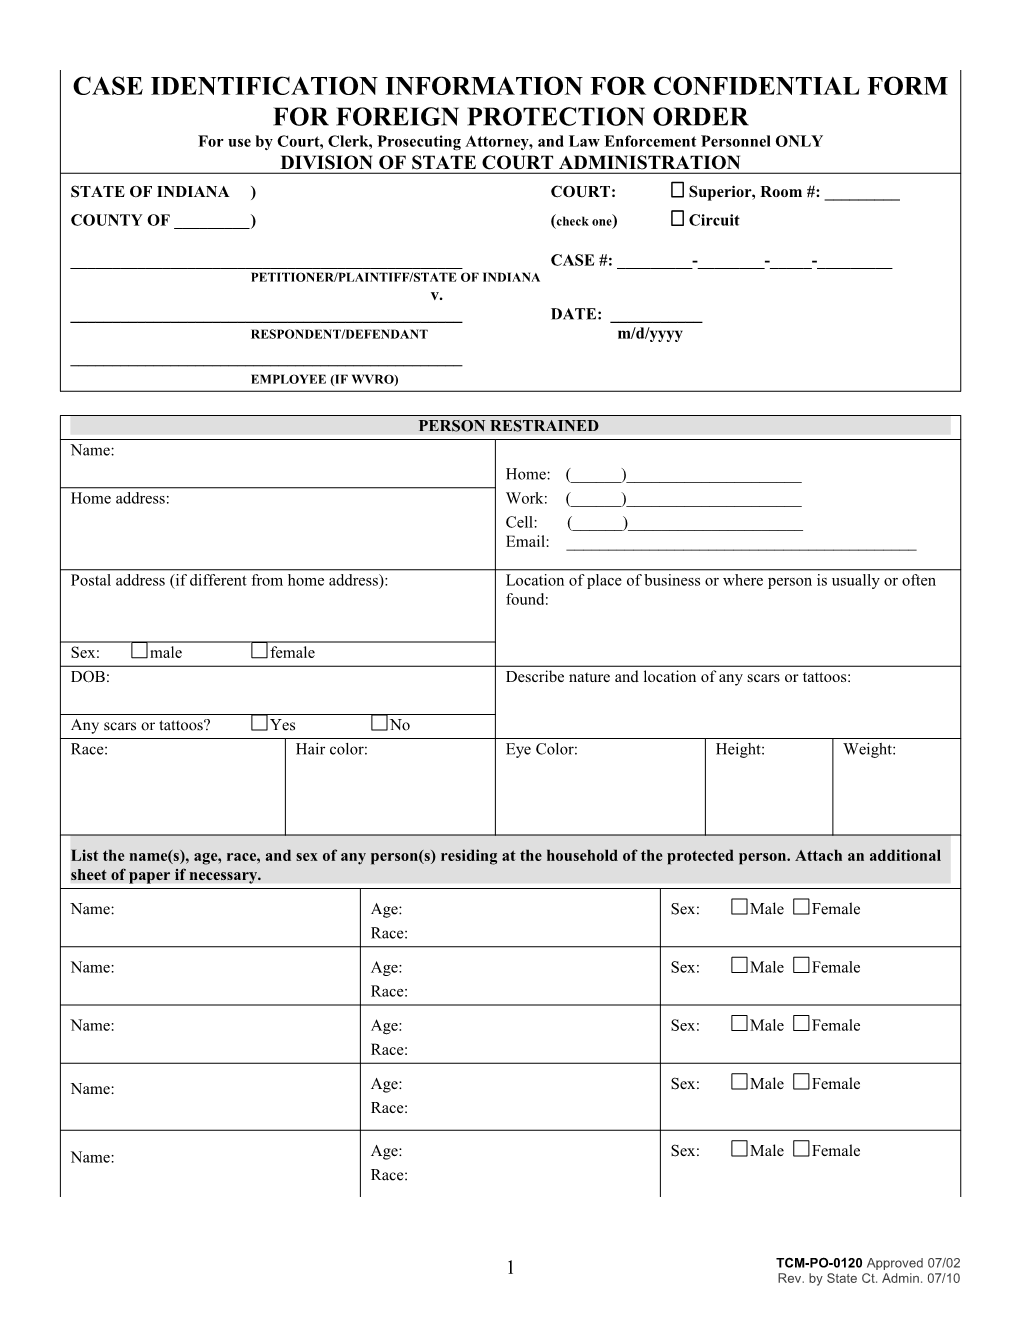 Confidential Data Entry Form For Foreign Protection Orders